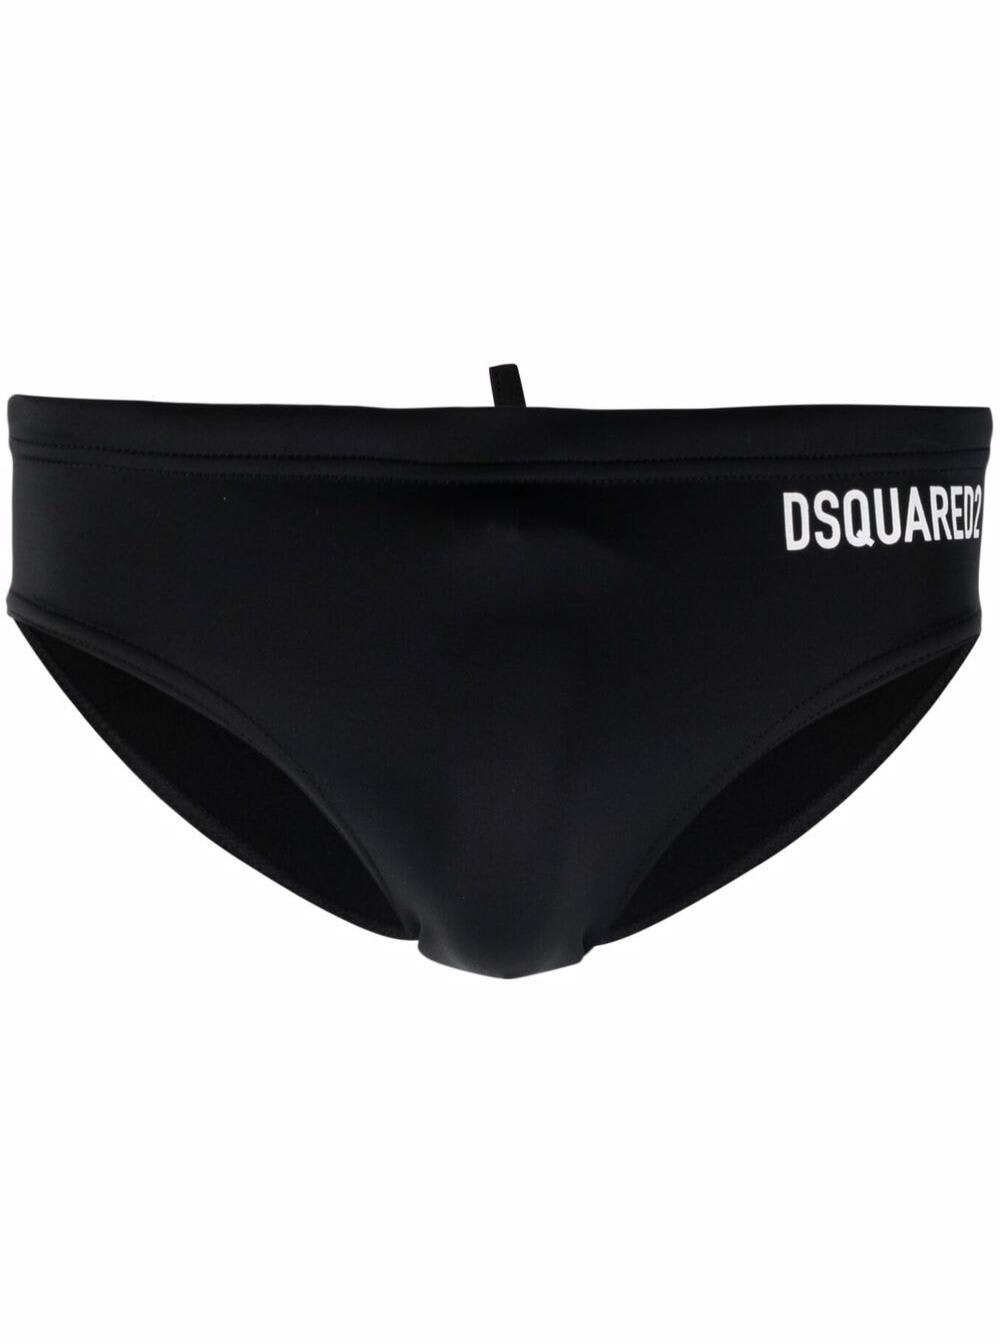 Dsquared2 D-squared2 Mans Stretch Fabric Swim Briefs With Back Logo Print